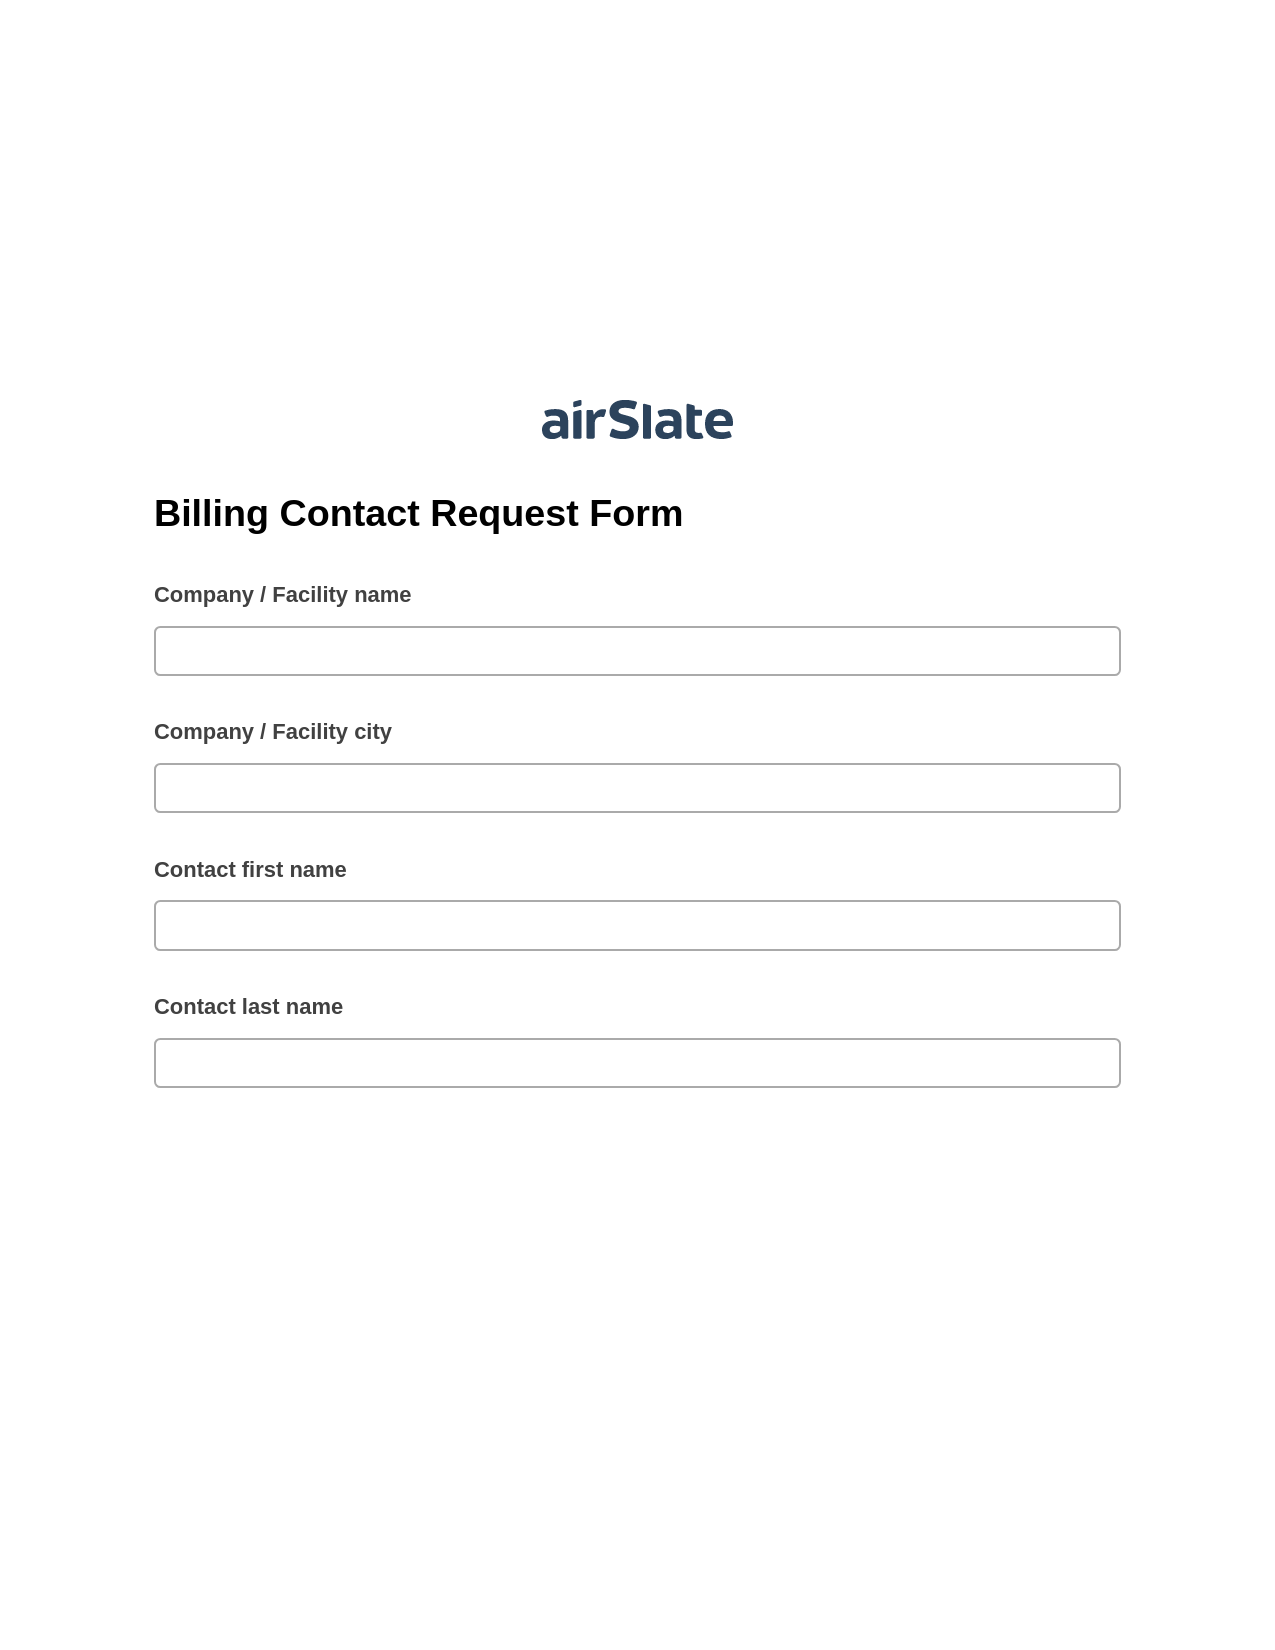 Multirole Billing Contact Request Form Pre-fill from Google Sheets Bot, SendGrid send Campaign bot, Post-finish Document Bot